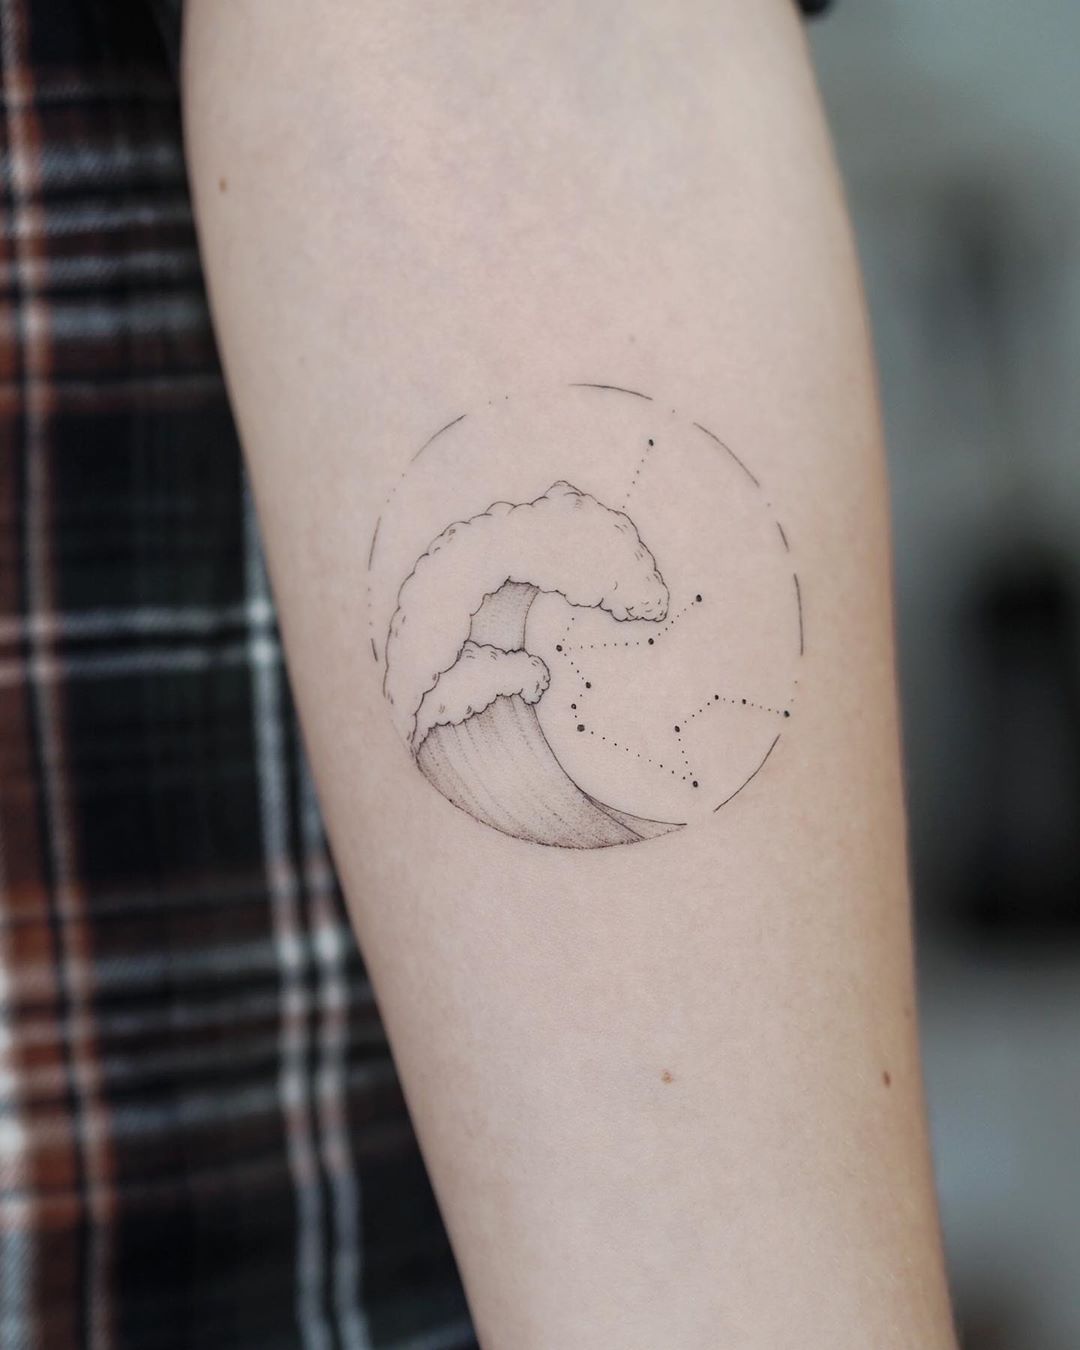 Tattoo tagged with mj art geometric shape small tiny wave ifttt  little nature ocean inner forearm illustrative fine line patriotic  hokusai line art japanese culture the great wave off kanagawa triangle 